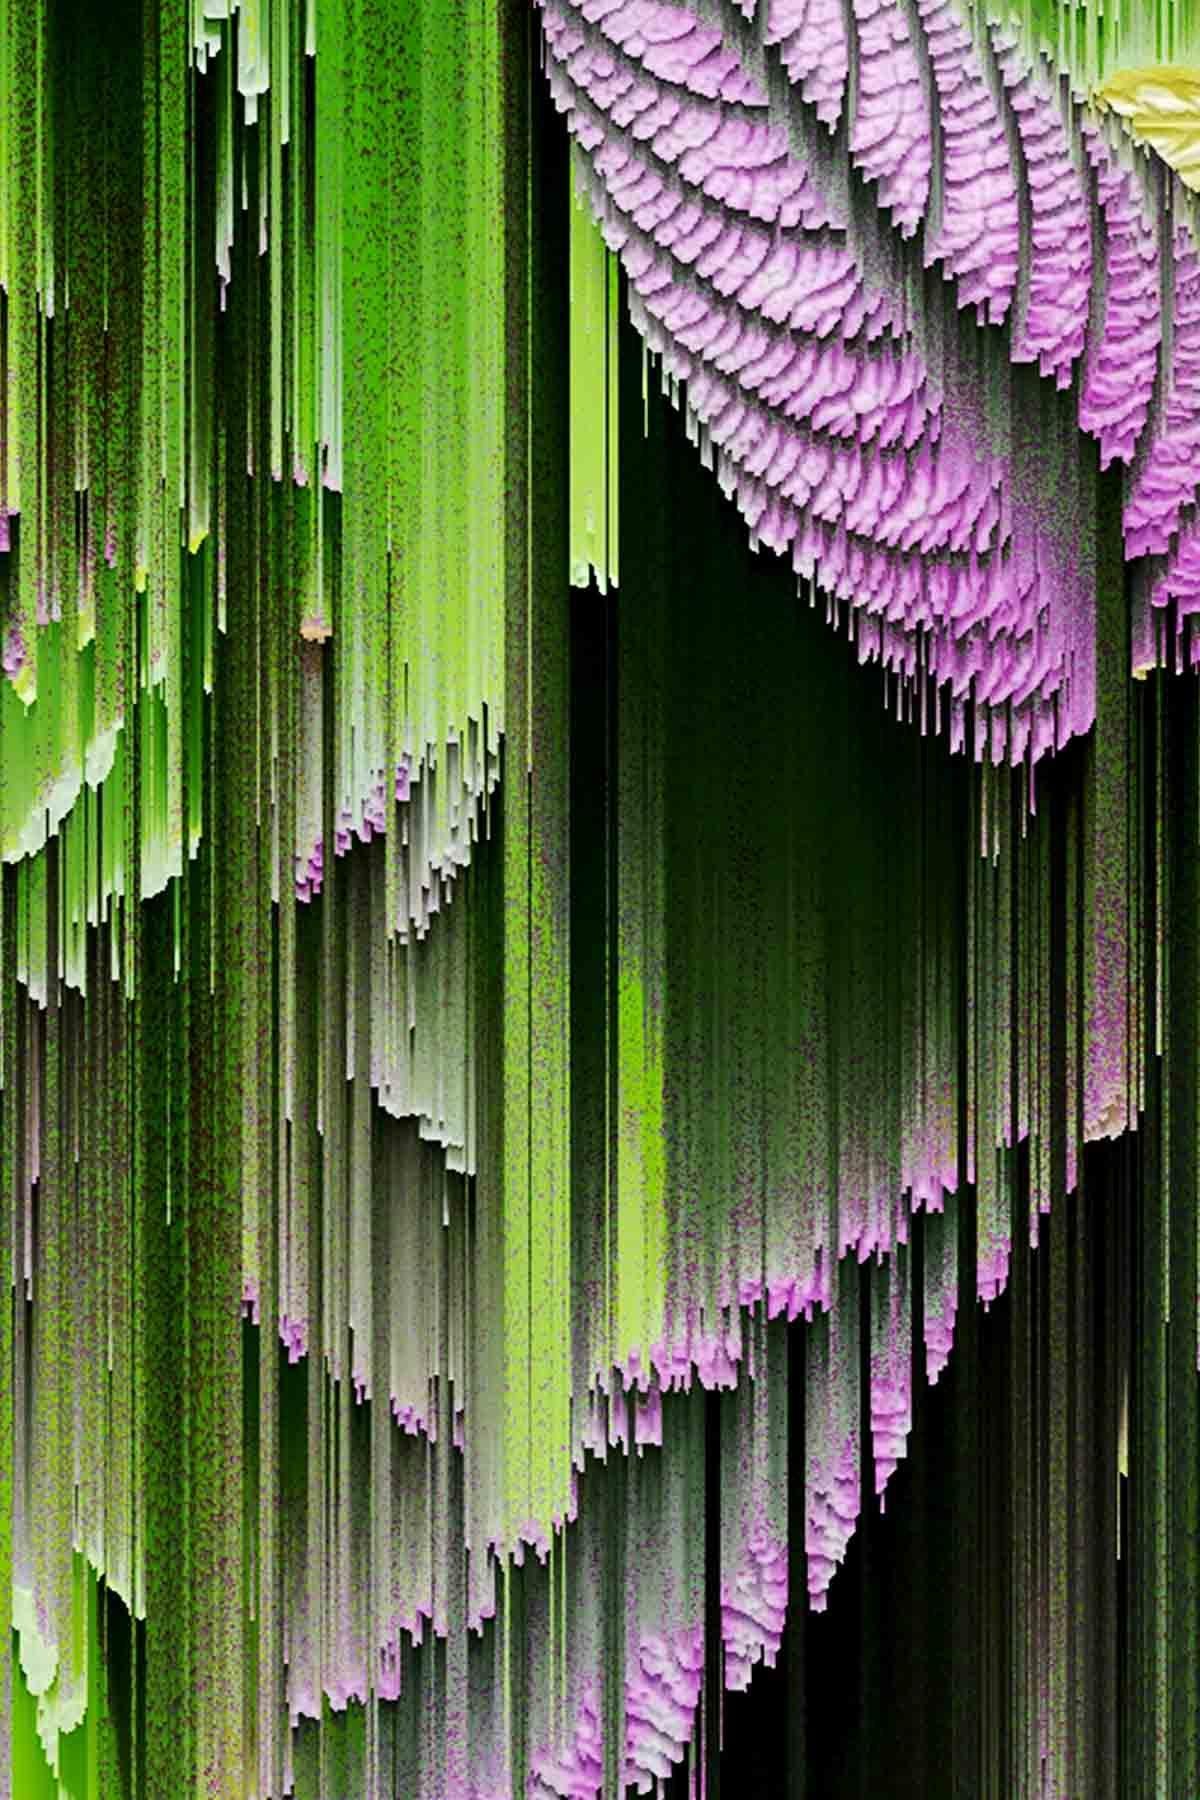 Outnumbered, Abstract Floral Art, Green and Pink Art, Futuristic Digital Art For Sale 2